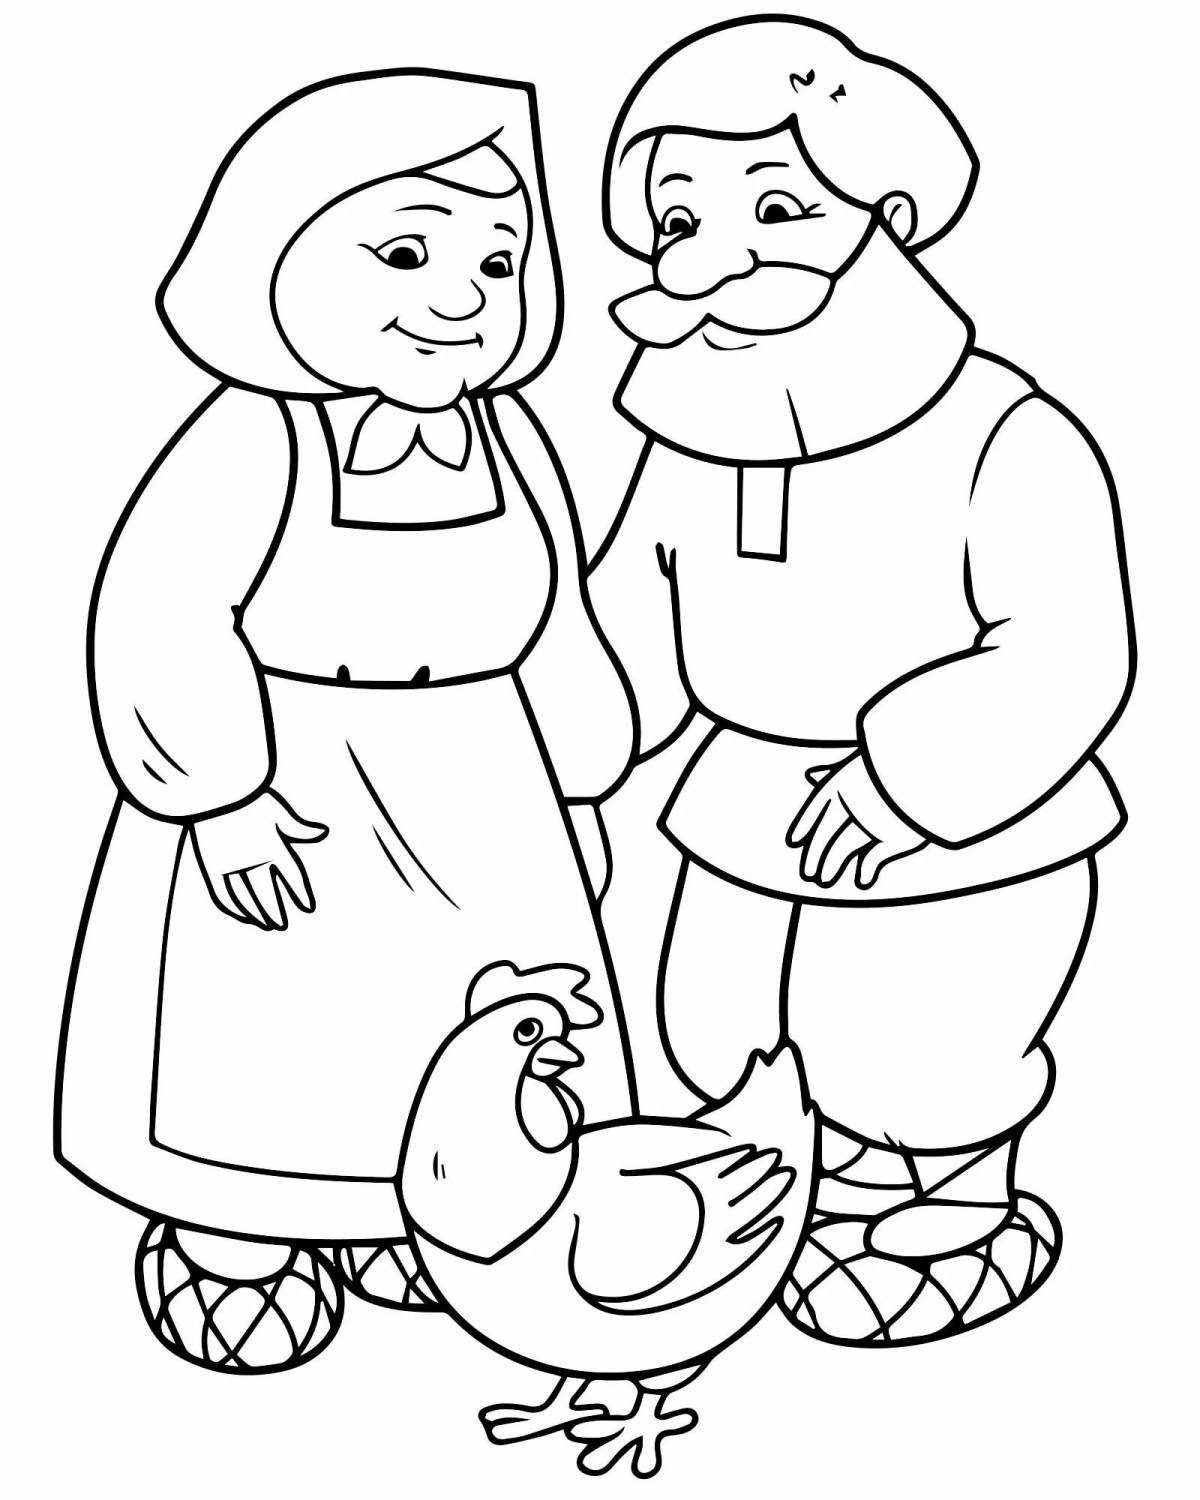 Amazing fairy tale coloring pages